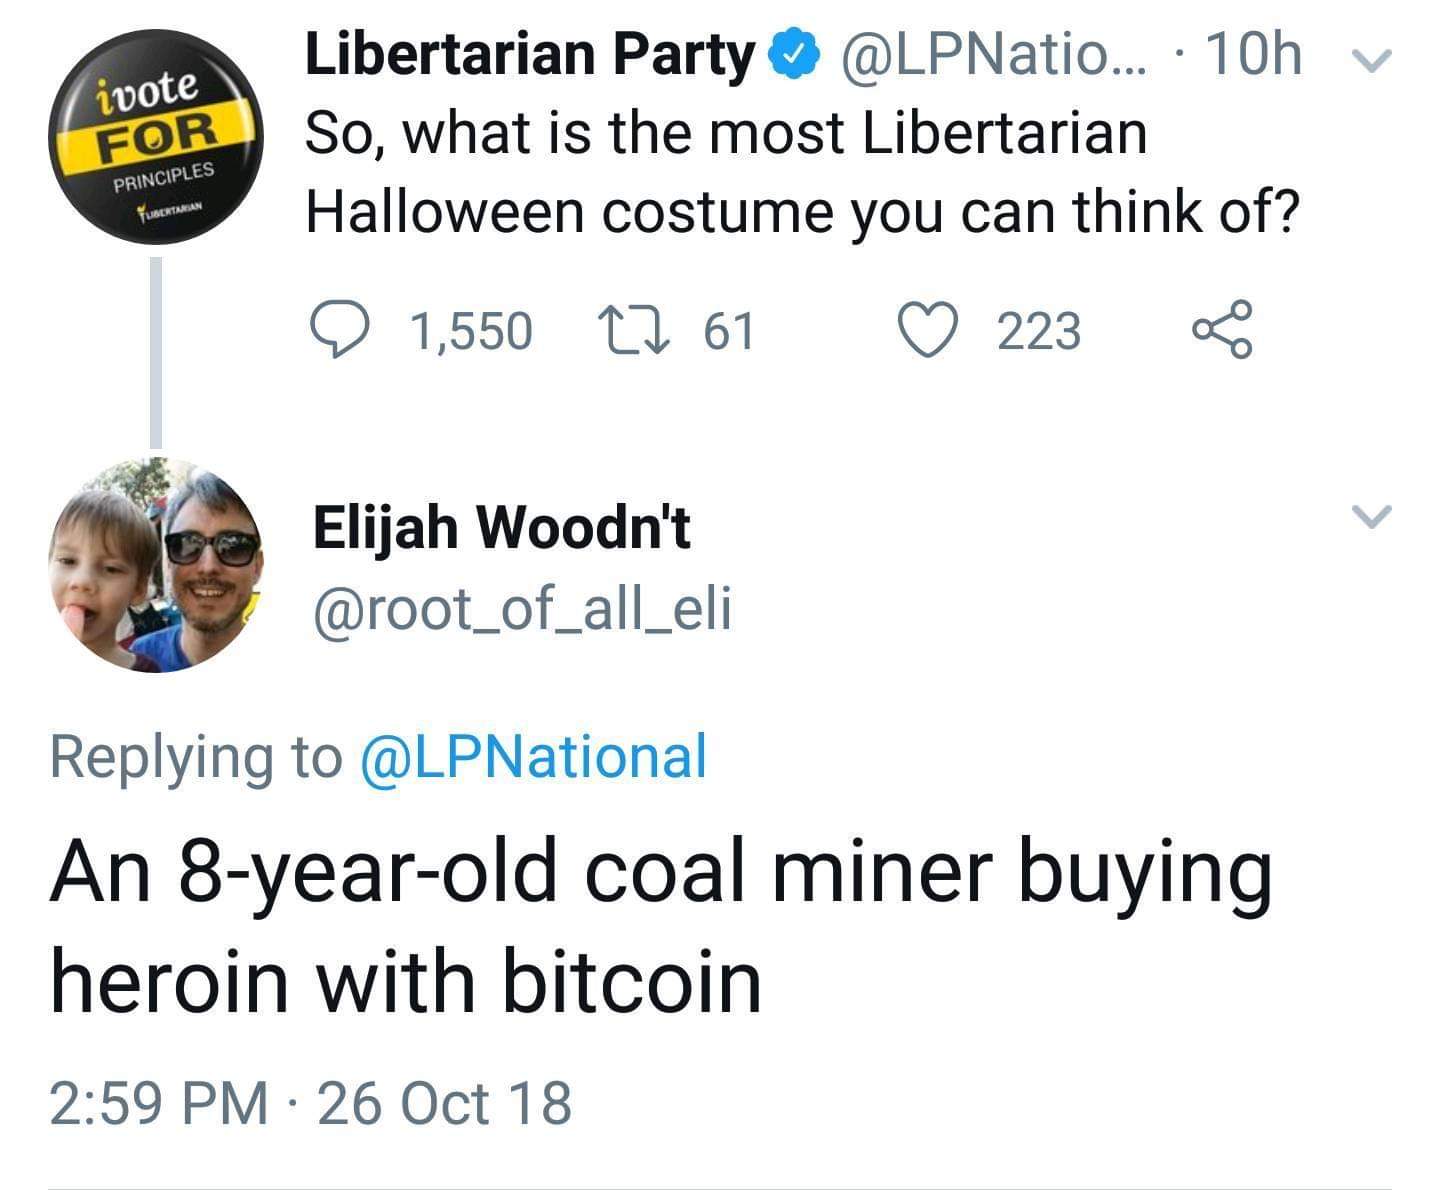 most libertarian thing ever - V ivote For Principles Libertarian Party ... 10h So, what is the most Libertarian Halloween costume you can think of? 1,550 12 61 223 Tlantaran Elijah Woodn't An 8yearold coal miner buying heroin with bitcoin 26 Oct 18